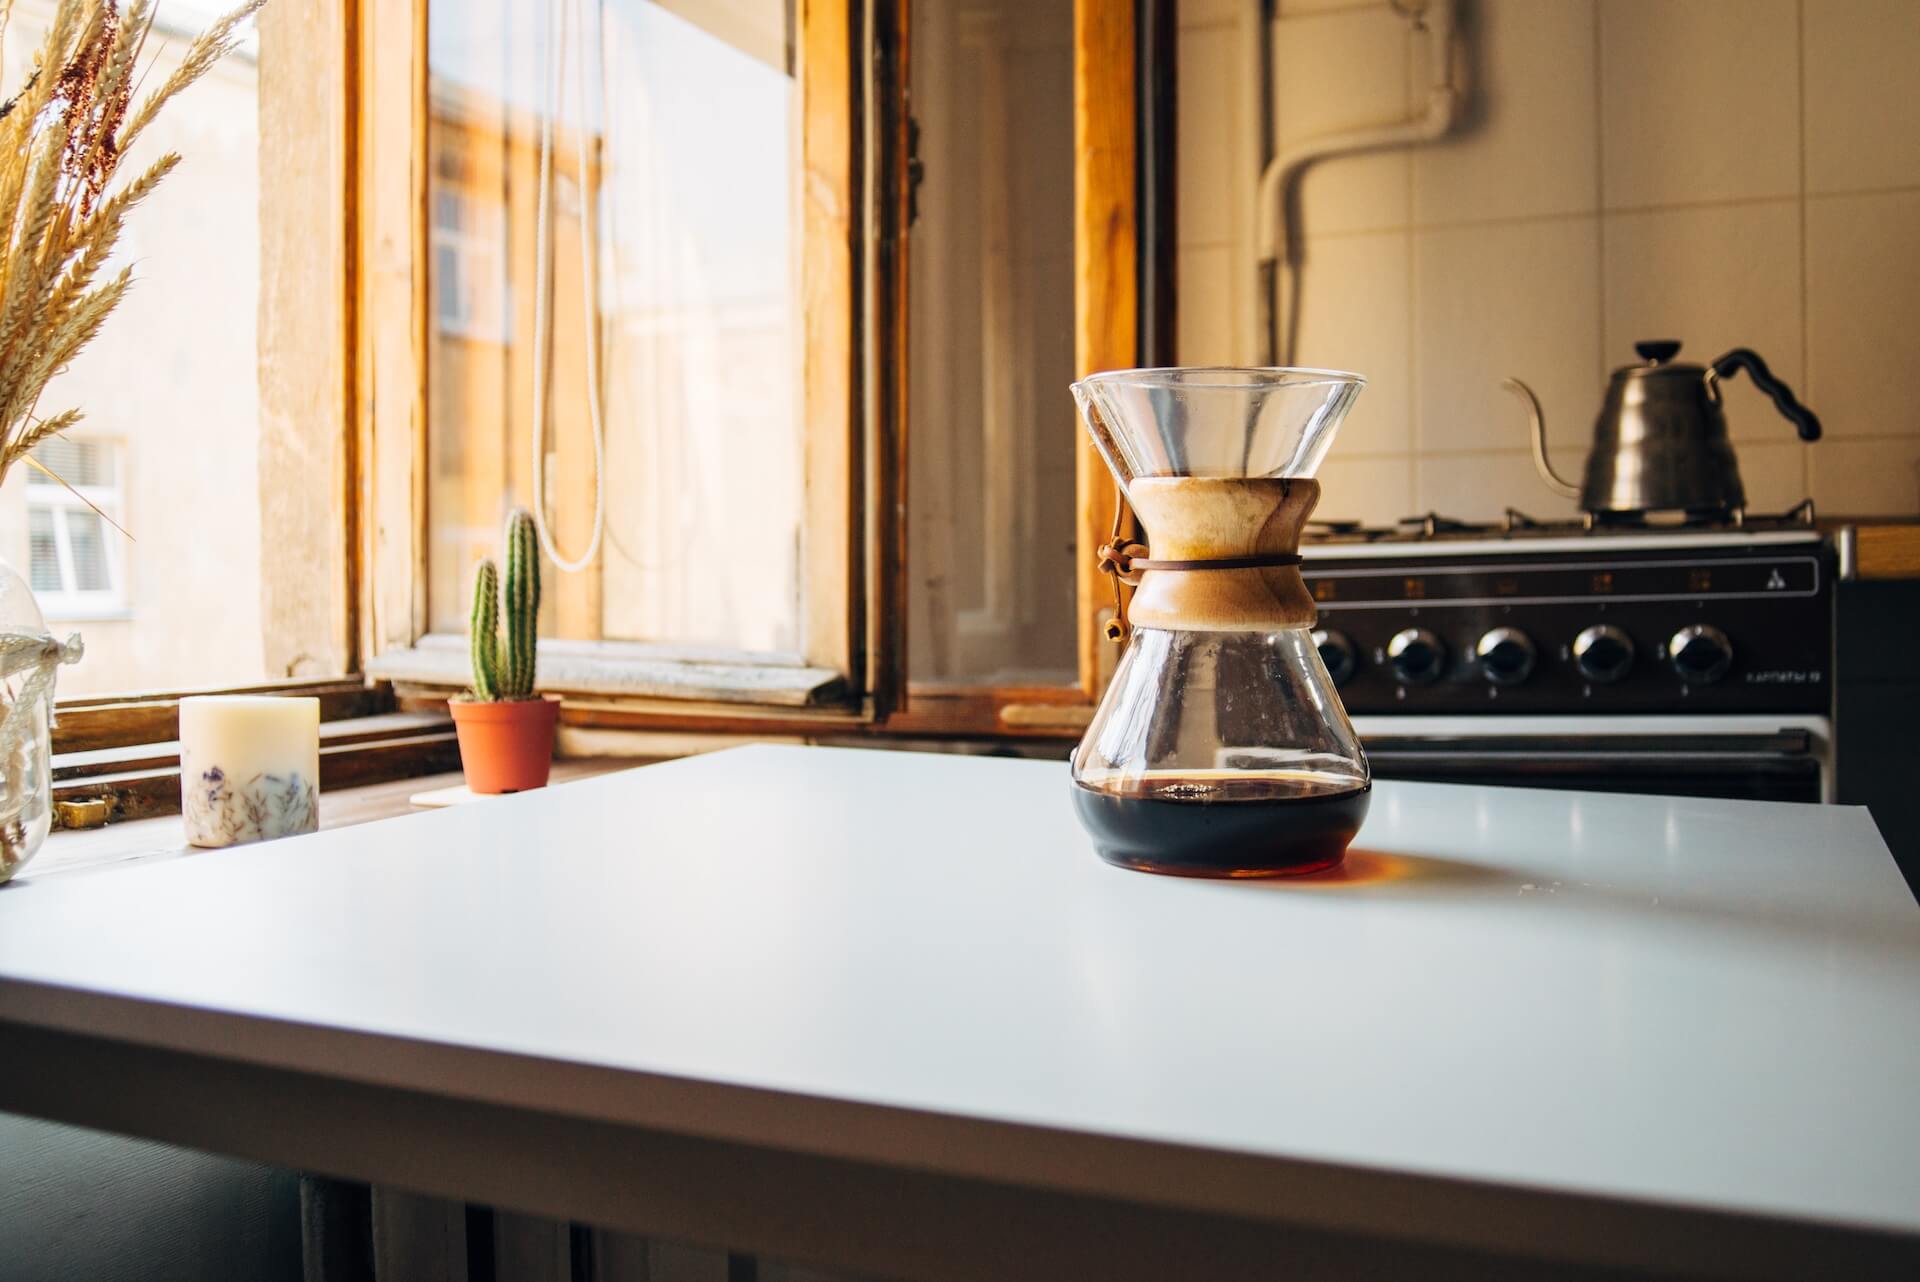 A beginners’ guide to brewing with Chemex